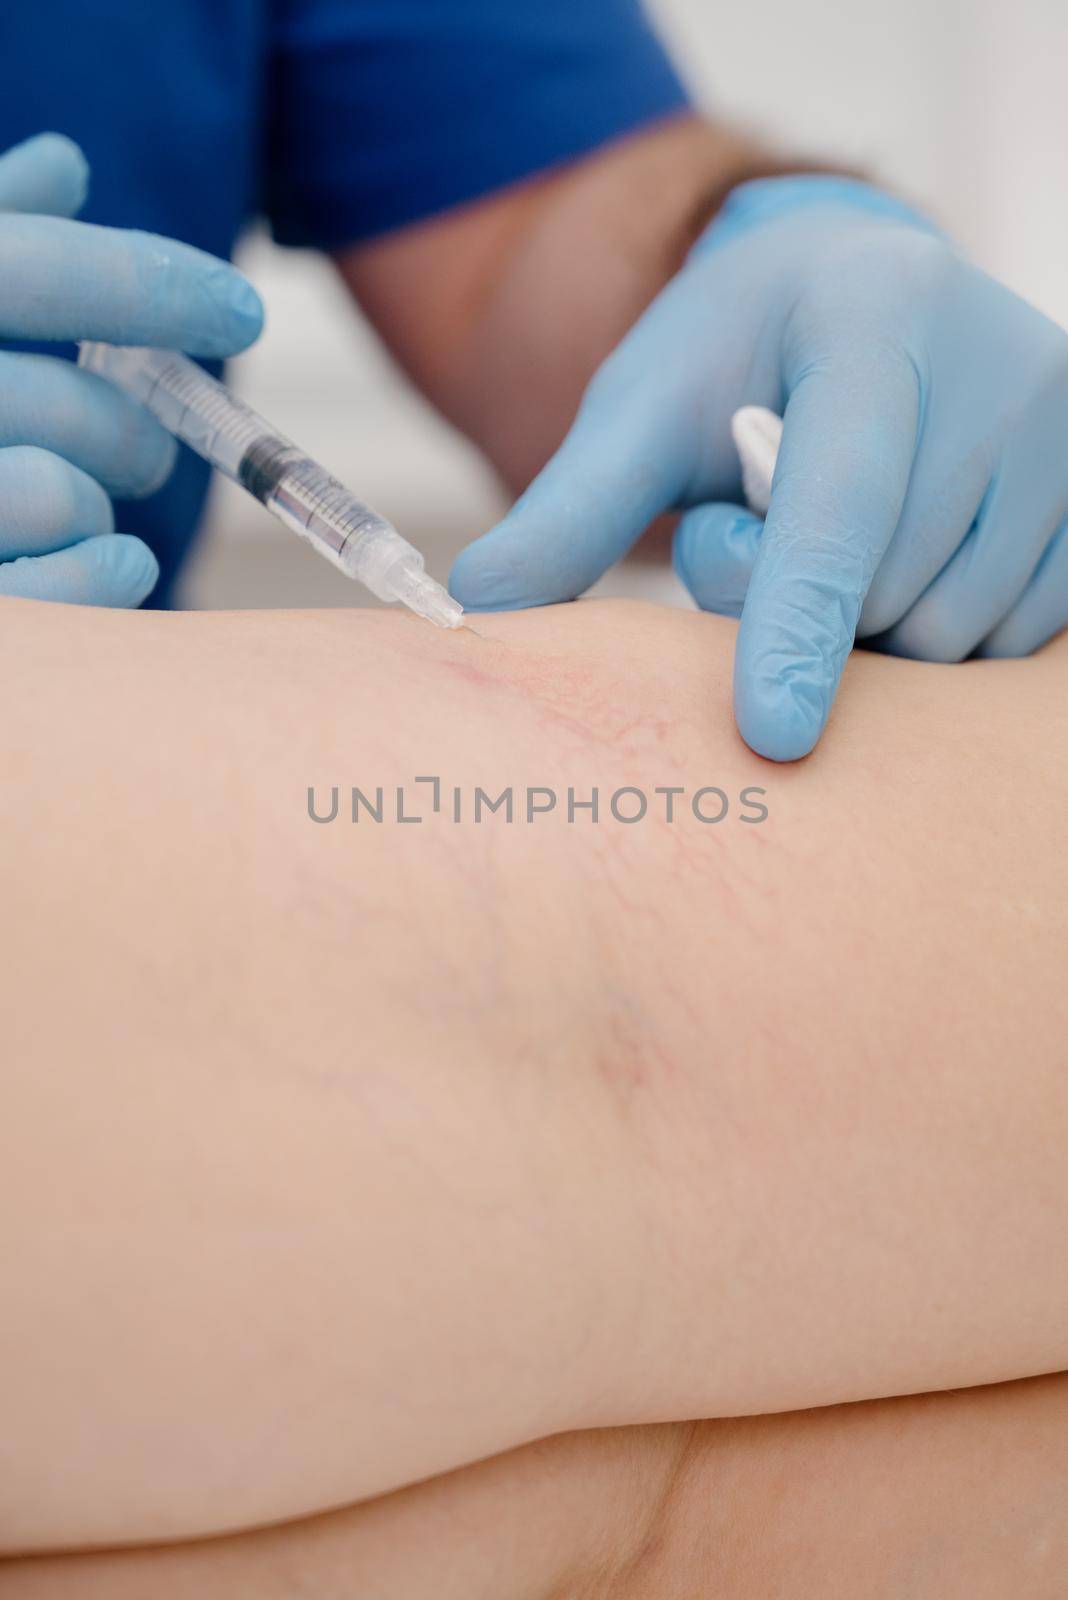 Removal of varicose veins on the legs.The doctor performs a medical sclerotherapy procedure used to eliminate varicose veins and vascular asterisks.